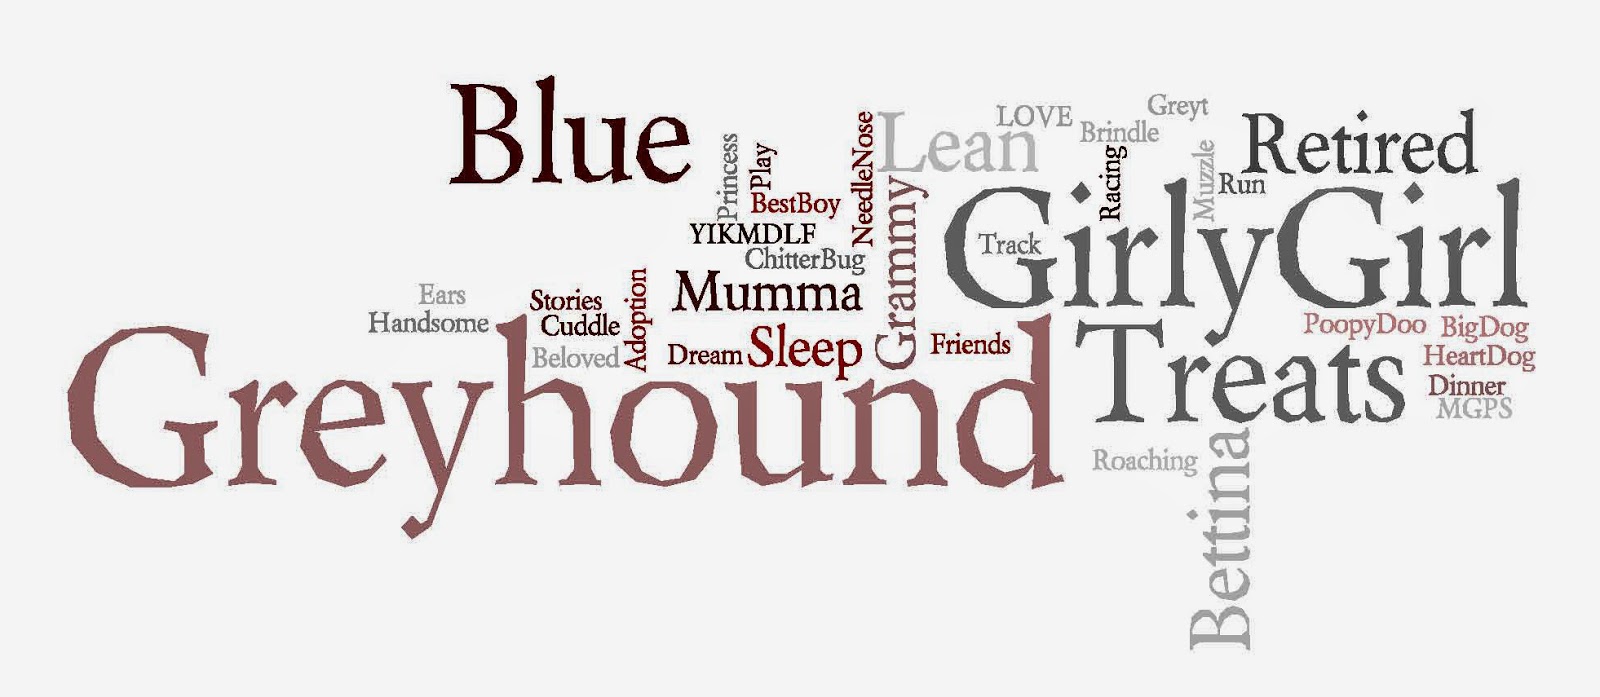 Our Family Wordle